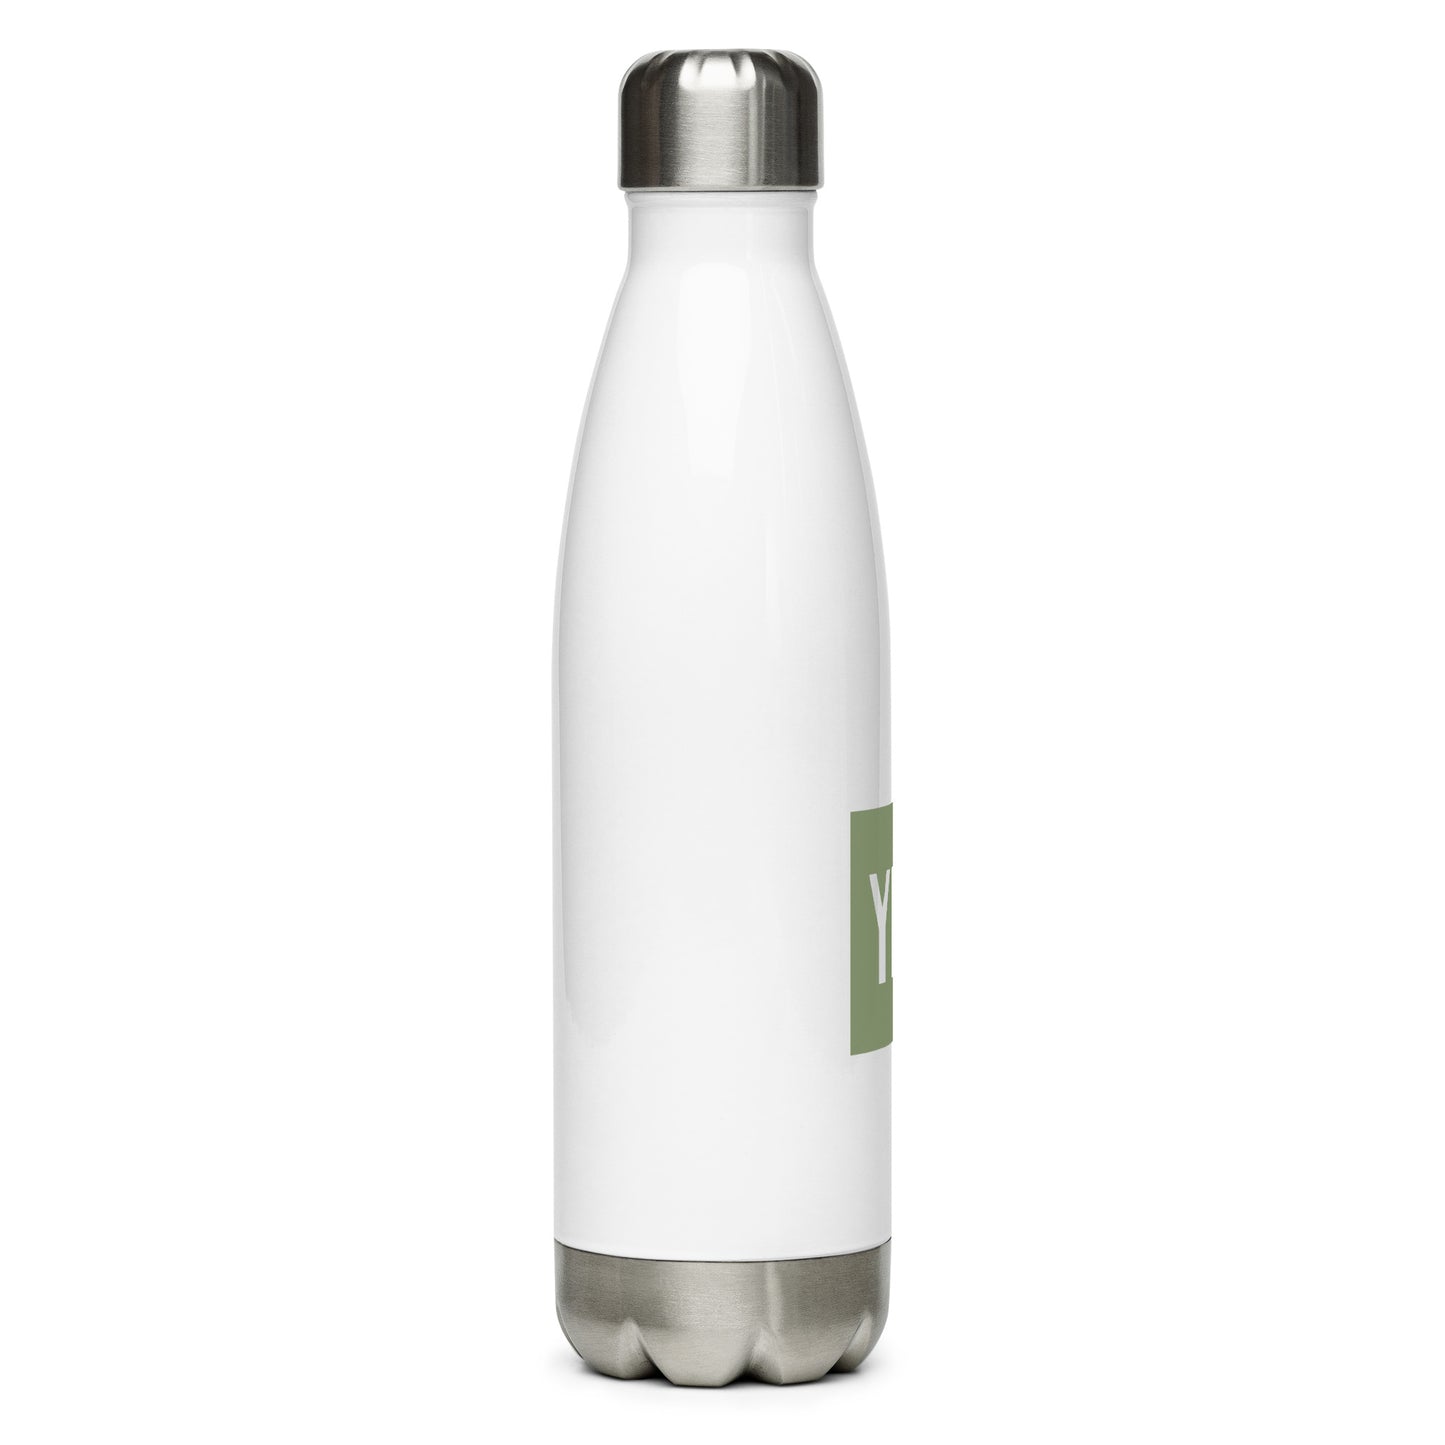 Aviation Gift Water Bottle - Camo Green • YFB Iqaluit • YHM Designs - Image 07